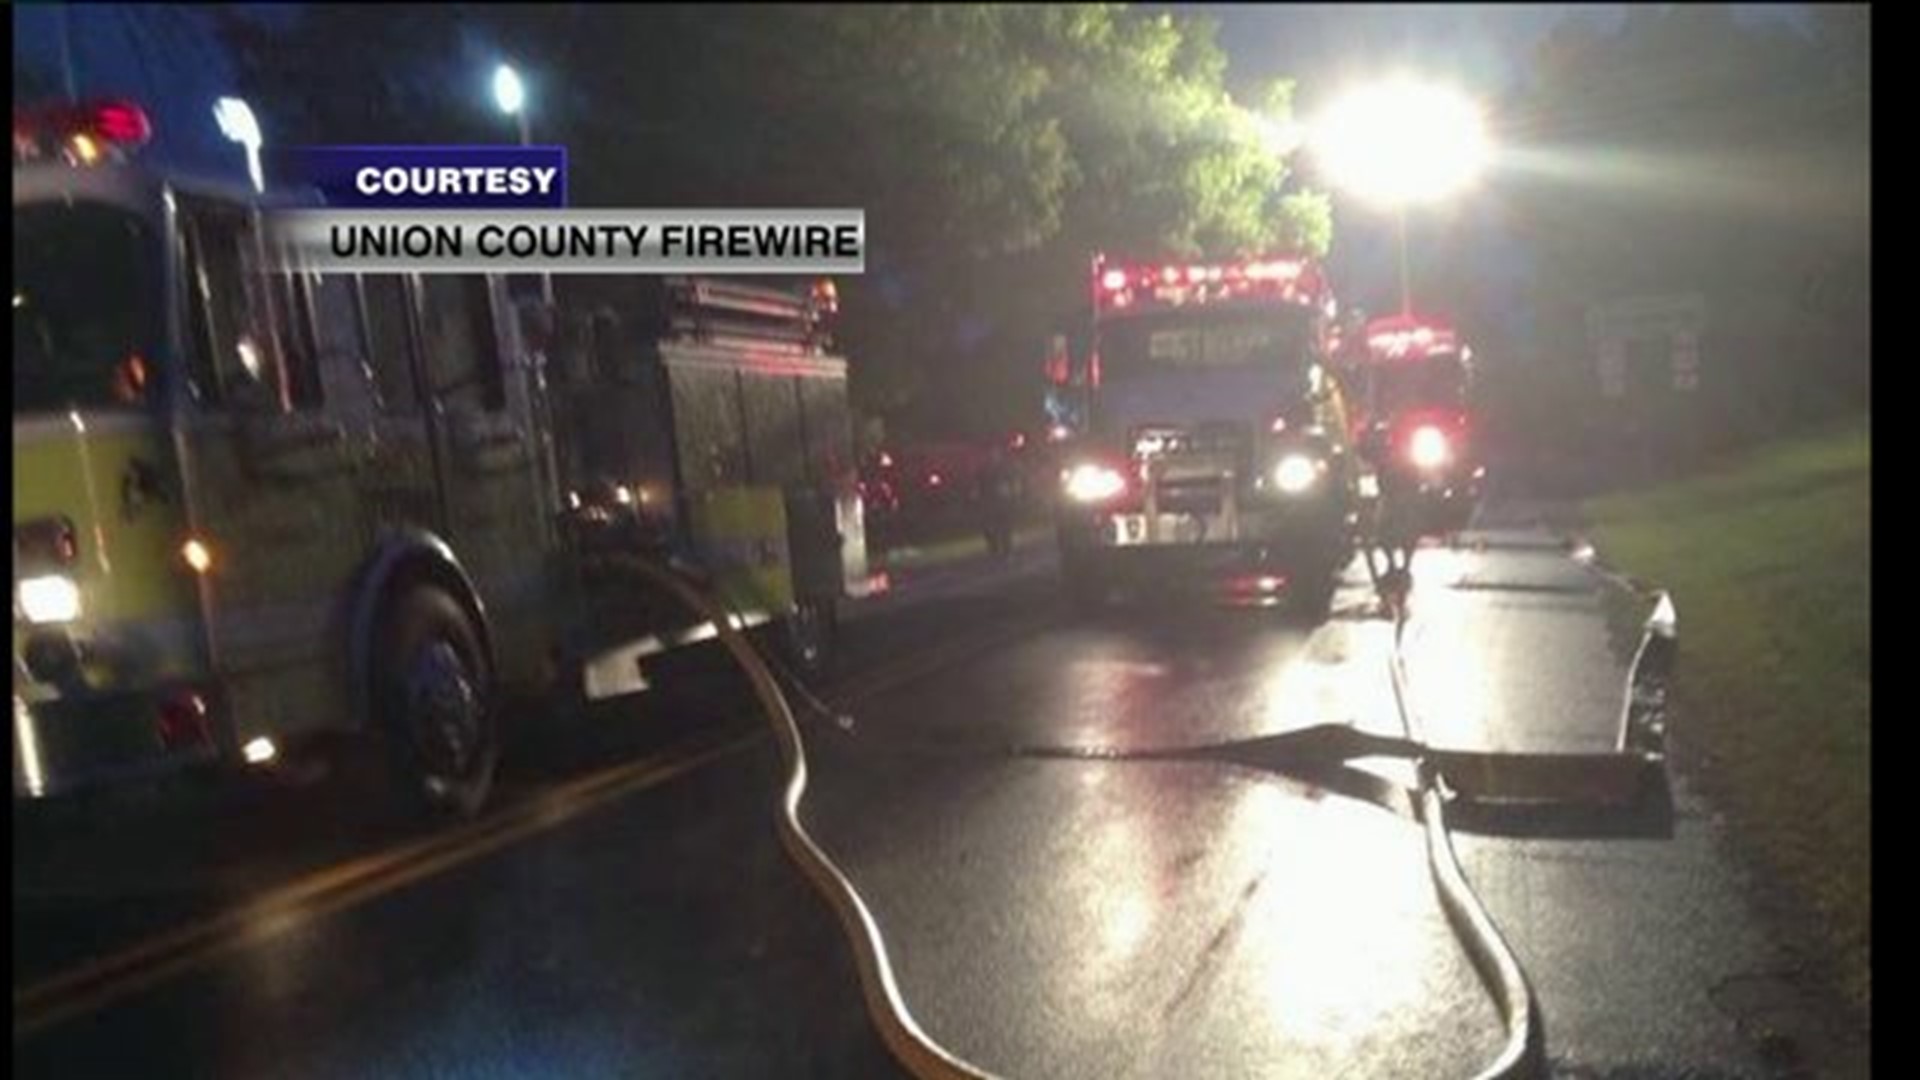 House Fire Possibly Caused by Lightning Strike